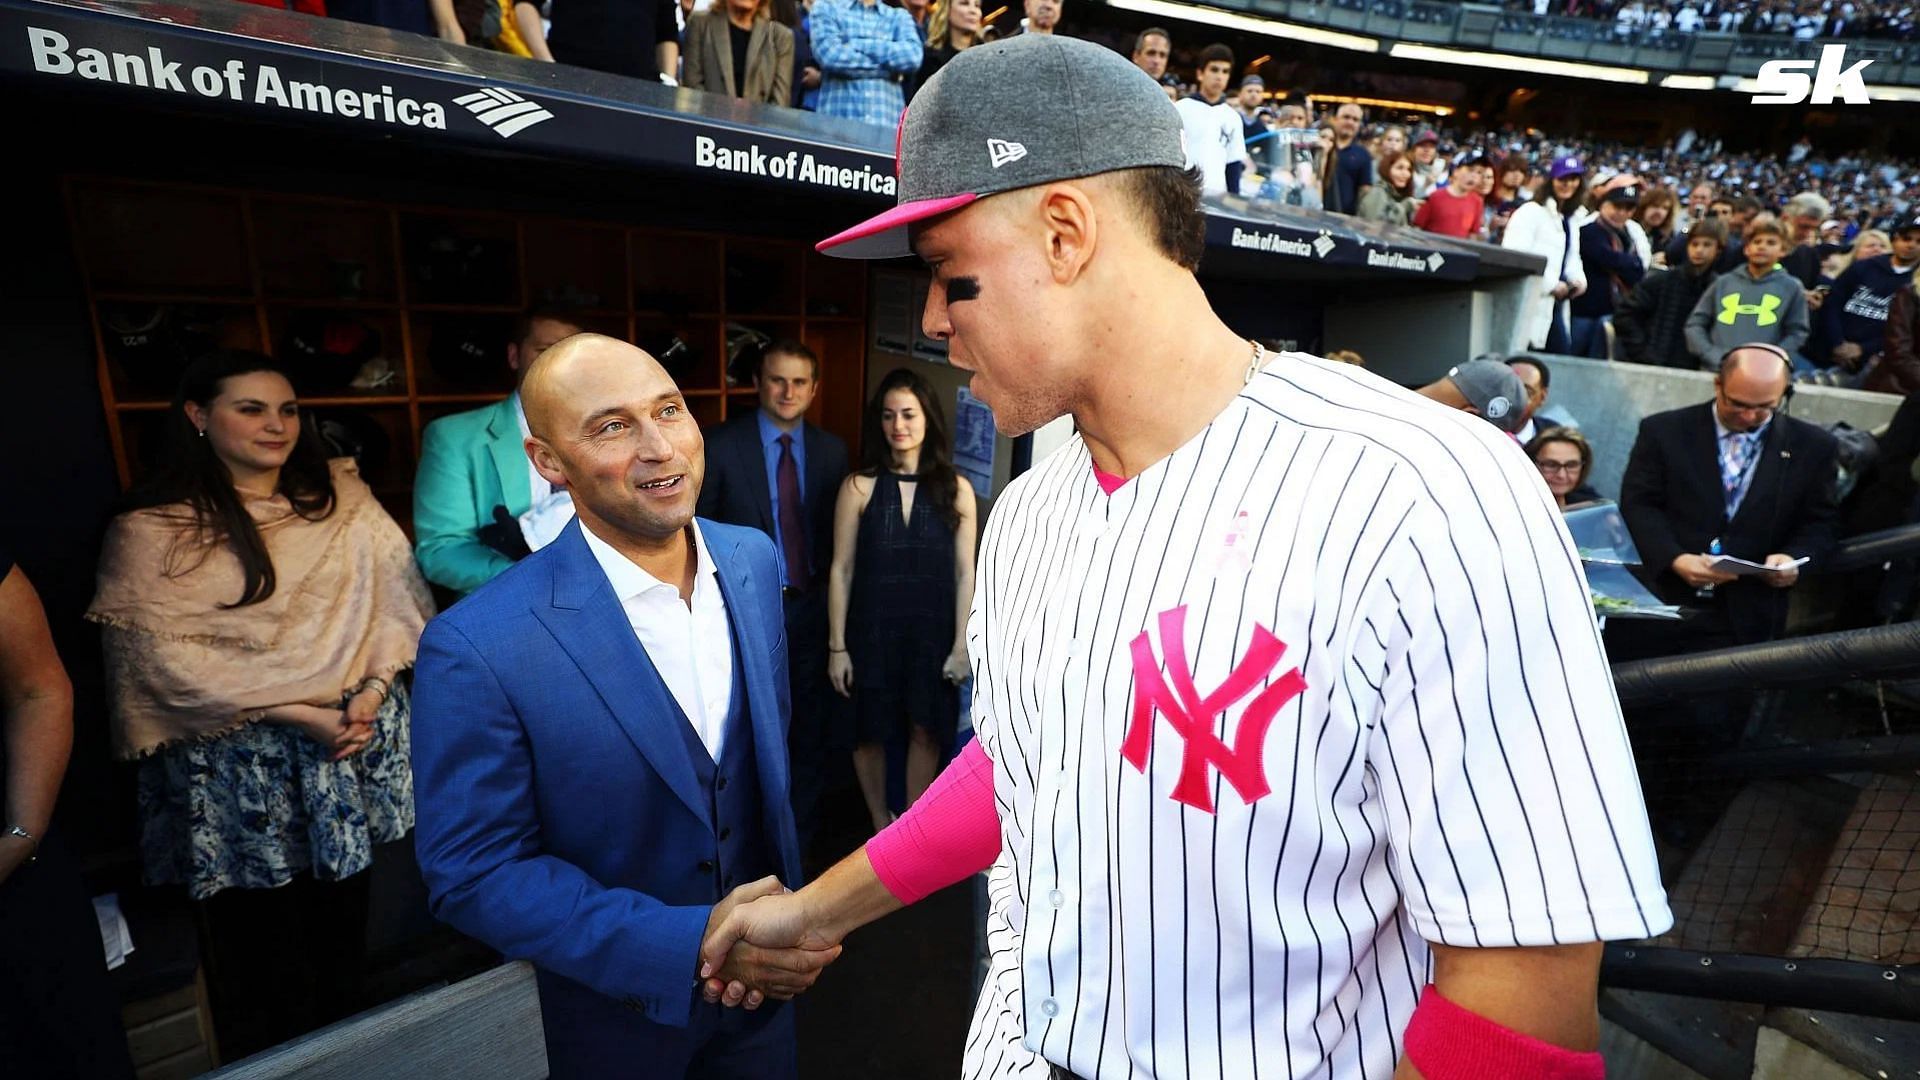  Derek Jeter on fooling the New Yorkers with faux humbleness: &quot;Ultimately, if you&rsquo;re artificial, time will expose you&quot;